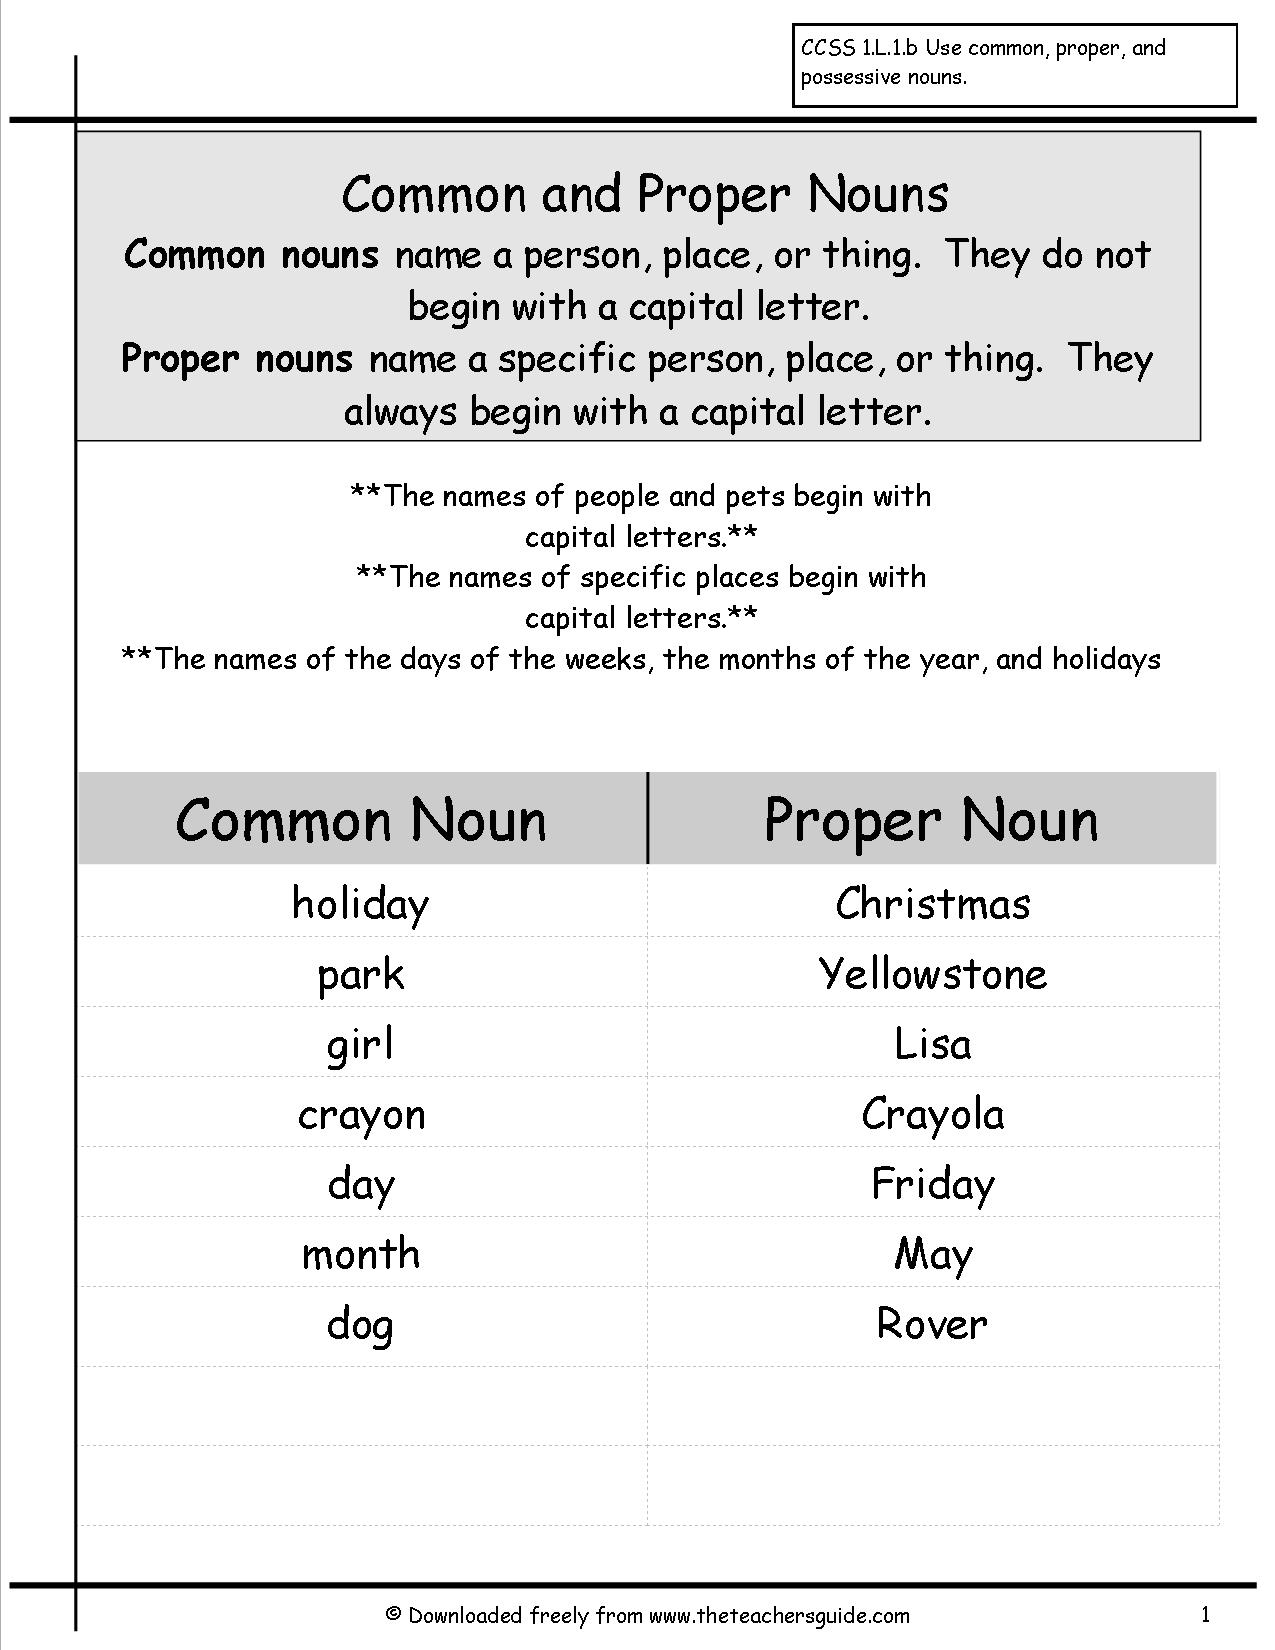 Worksheet On Common And Proper Noun